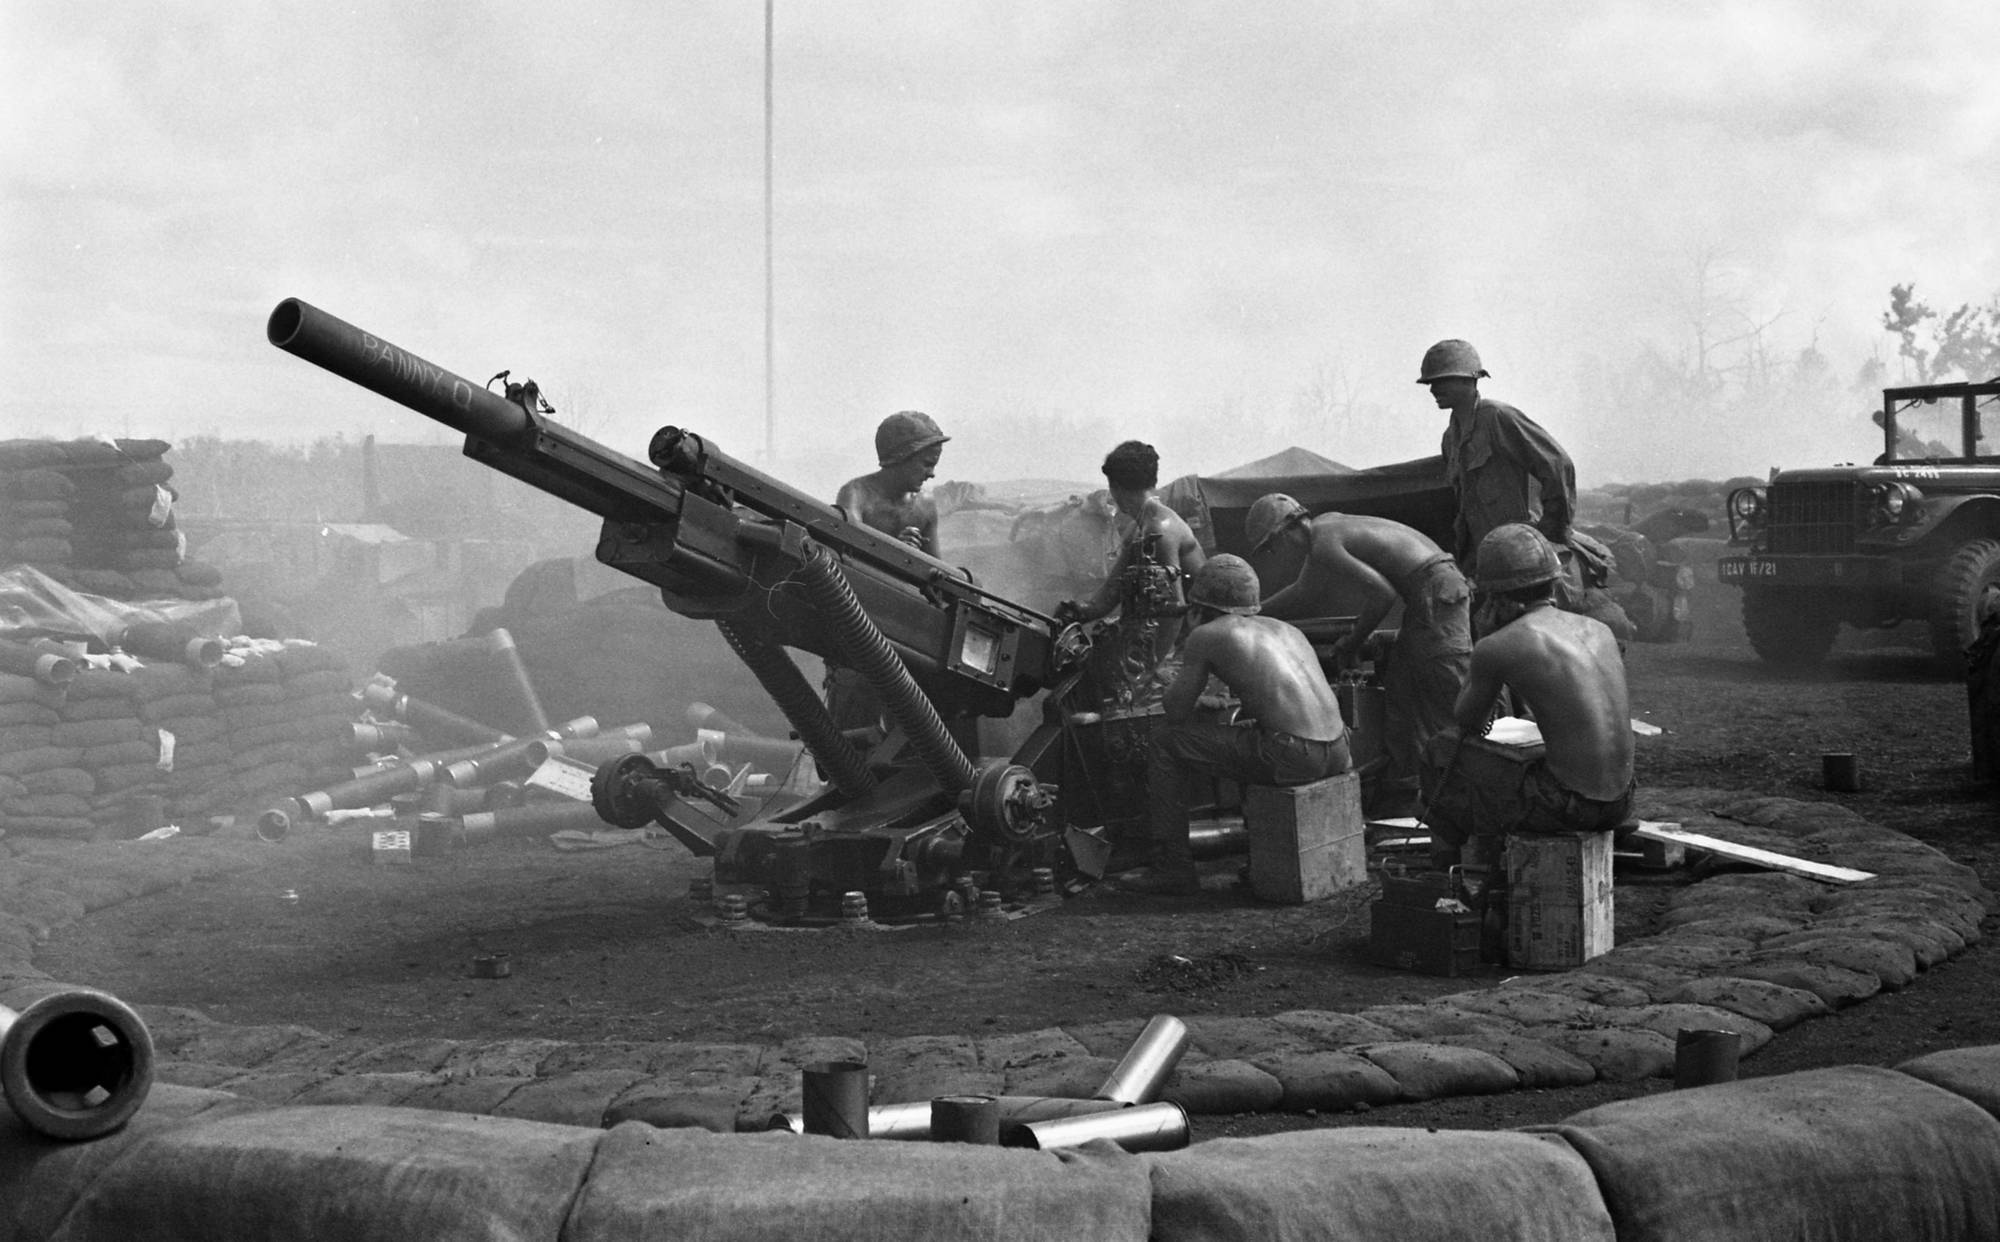 A group of men gathered around a cannon.